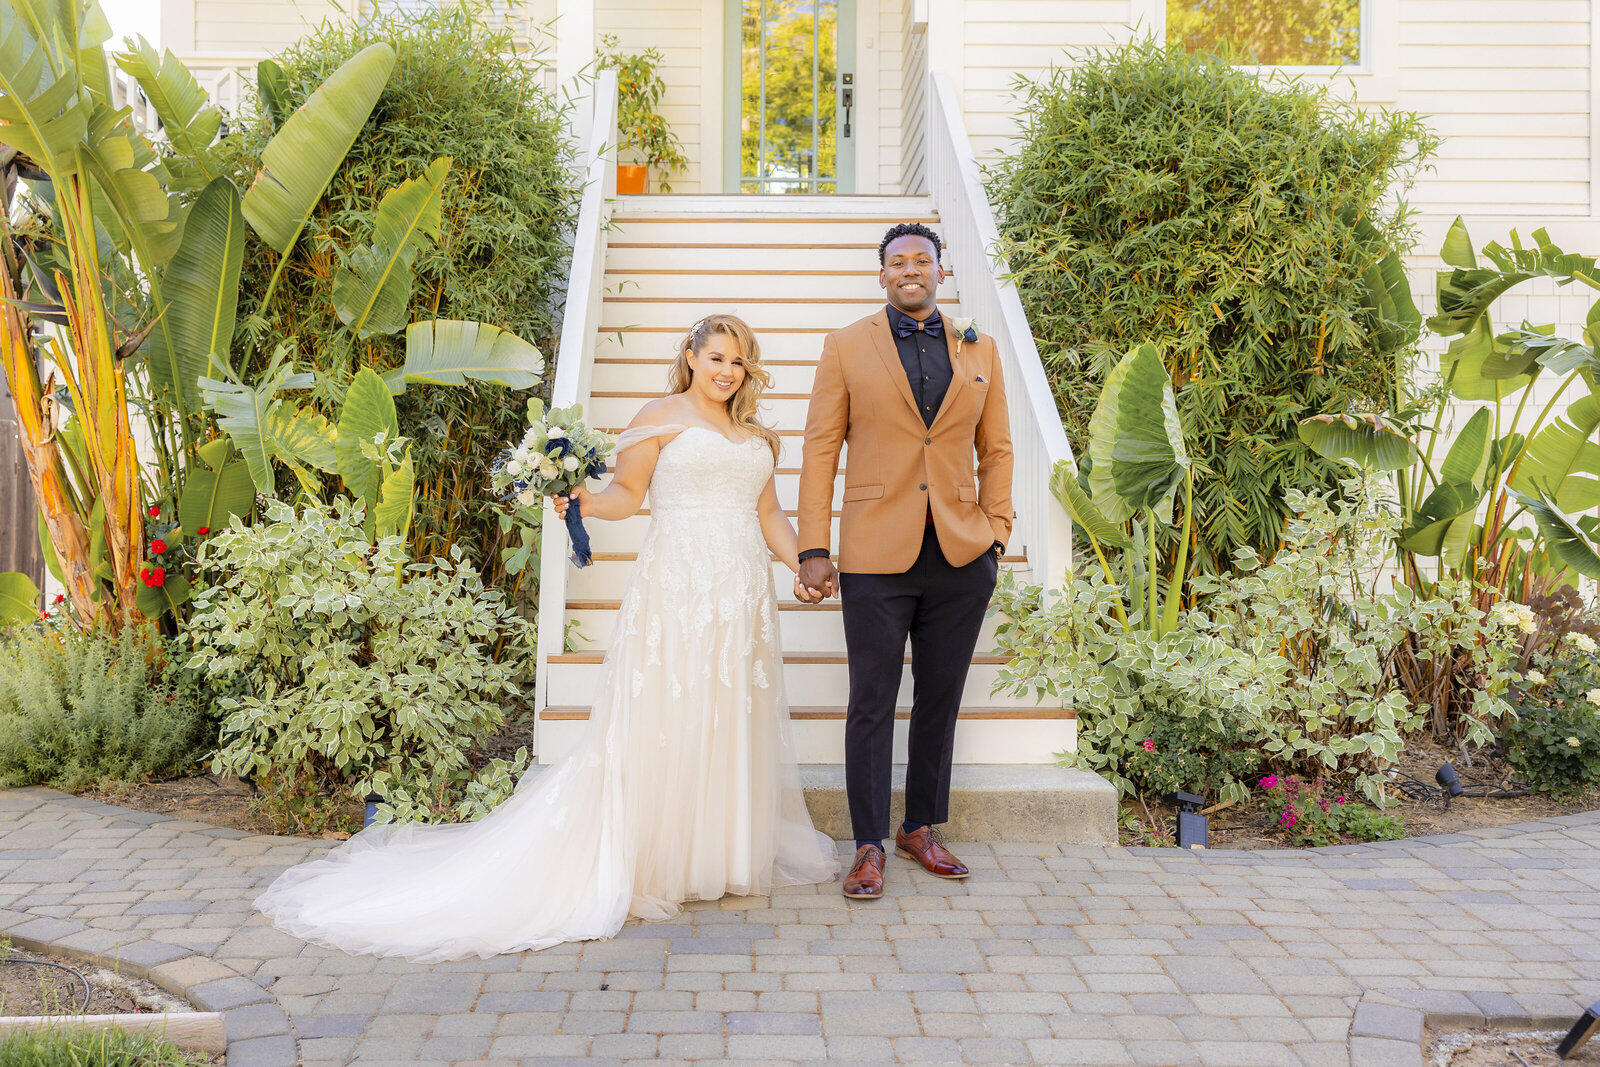 Bride and groom hold hands and look at camera in front of porch, captured by Philippe Studio Pro, midtown Sacramento wedding photographer